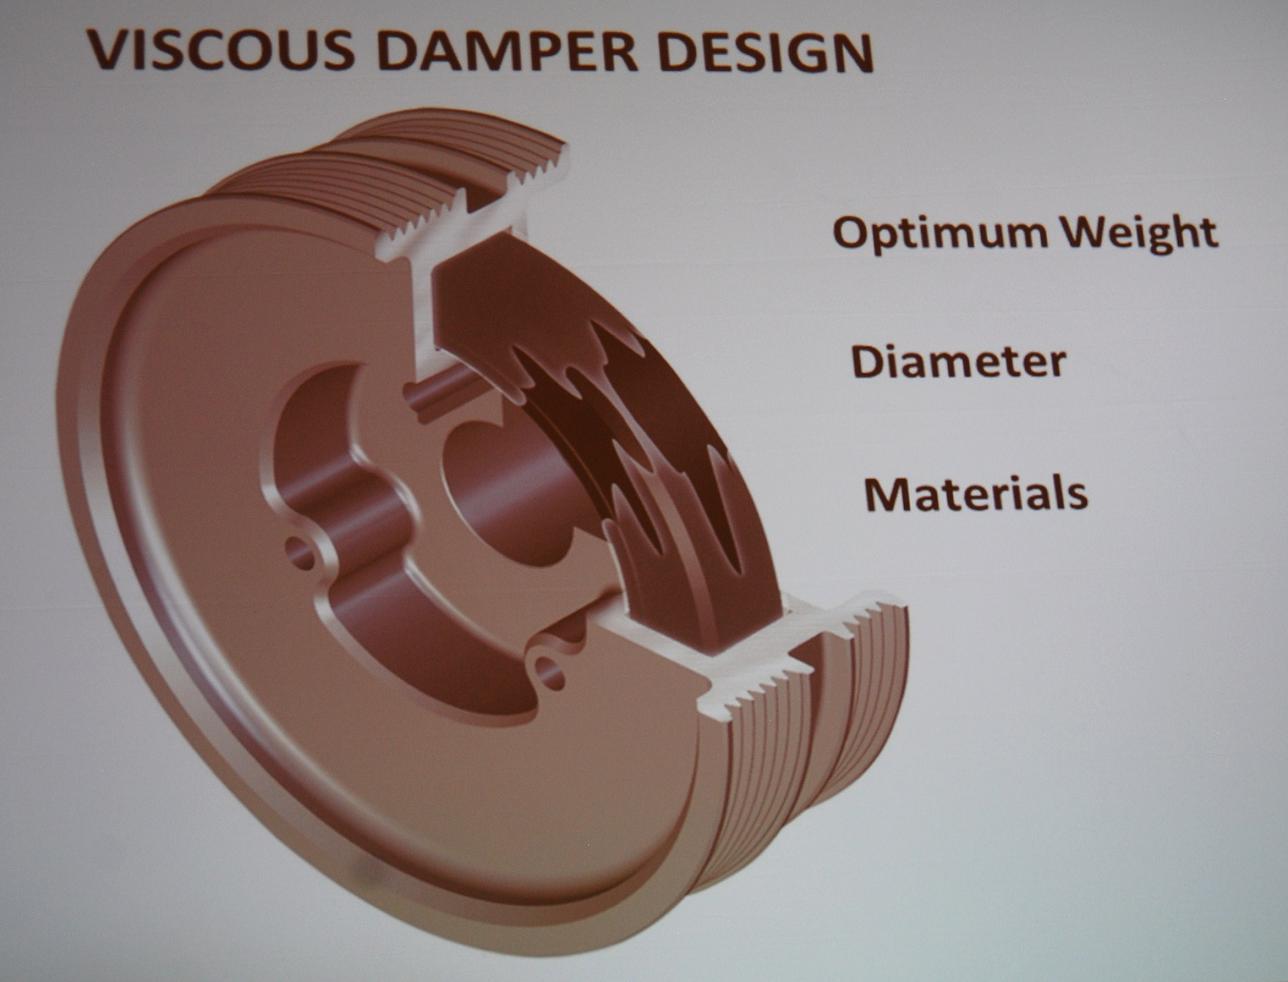 The viscous damper is designed for smoother operation